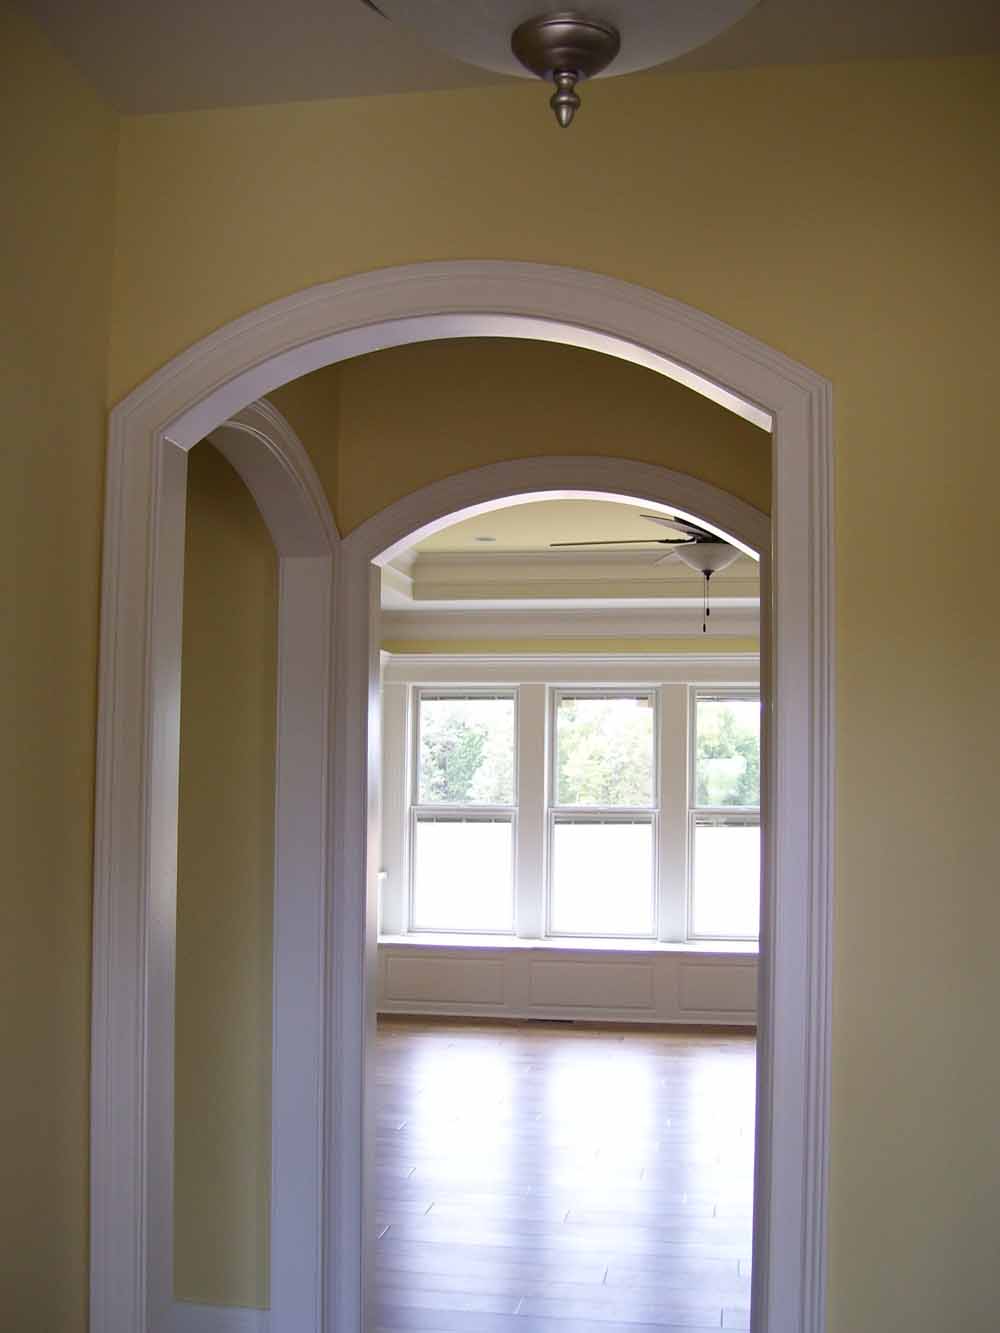 Arched opening from kitchen to dining room